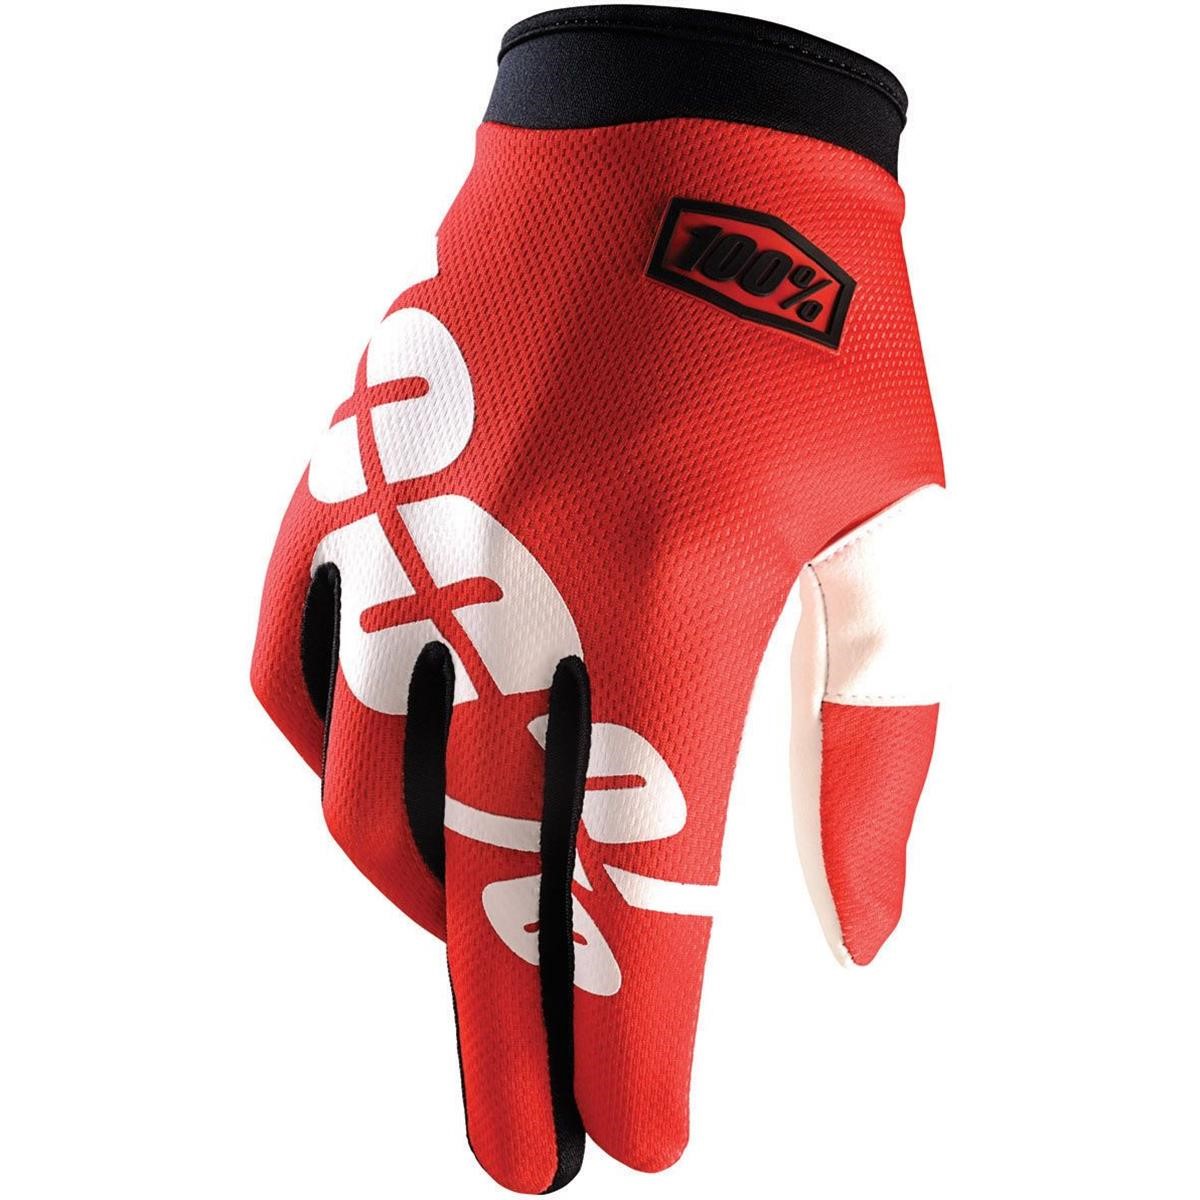 100% Bike Gloves iTrack Fire Red